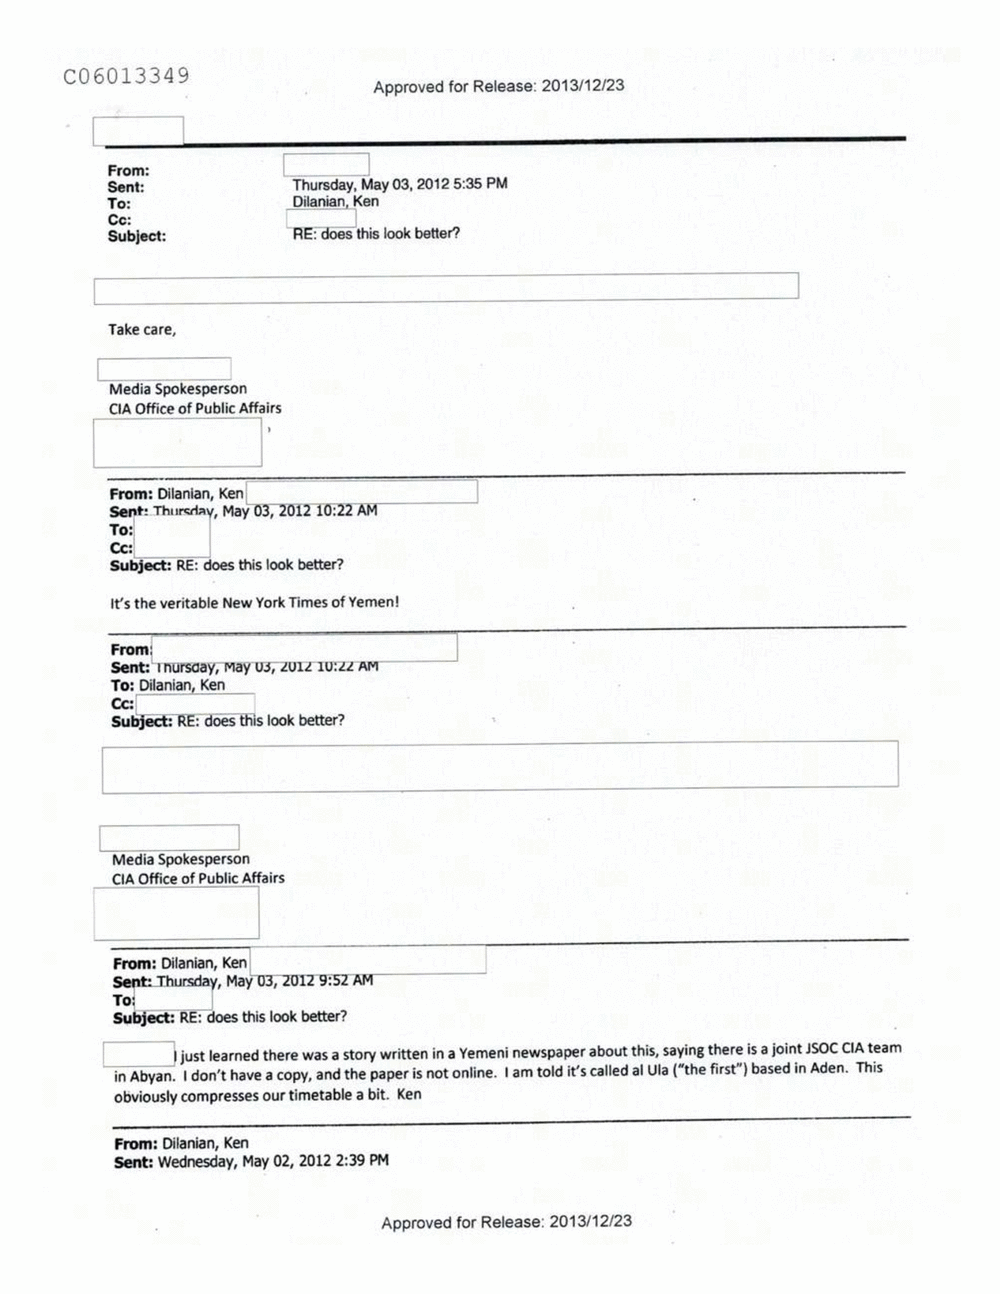 Page 261 from Email Correspondence Between Reporters and CIA Flacks